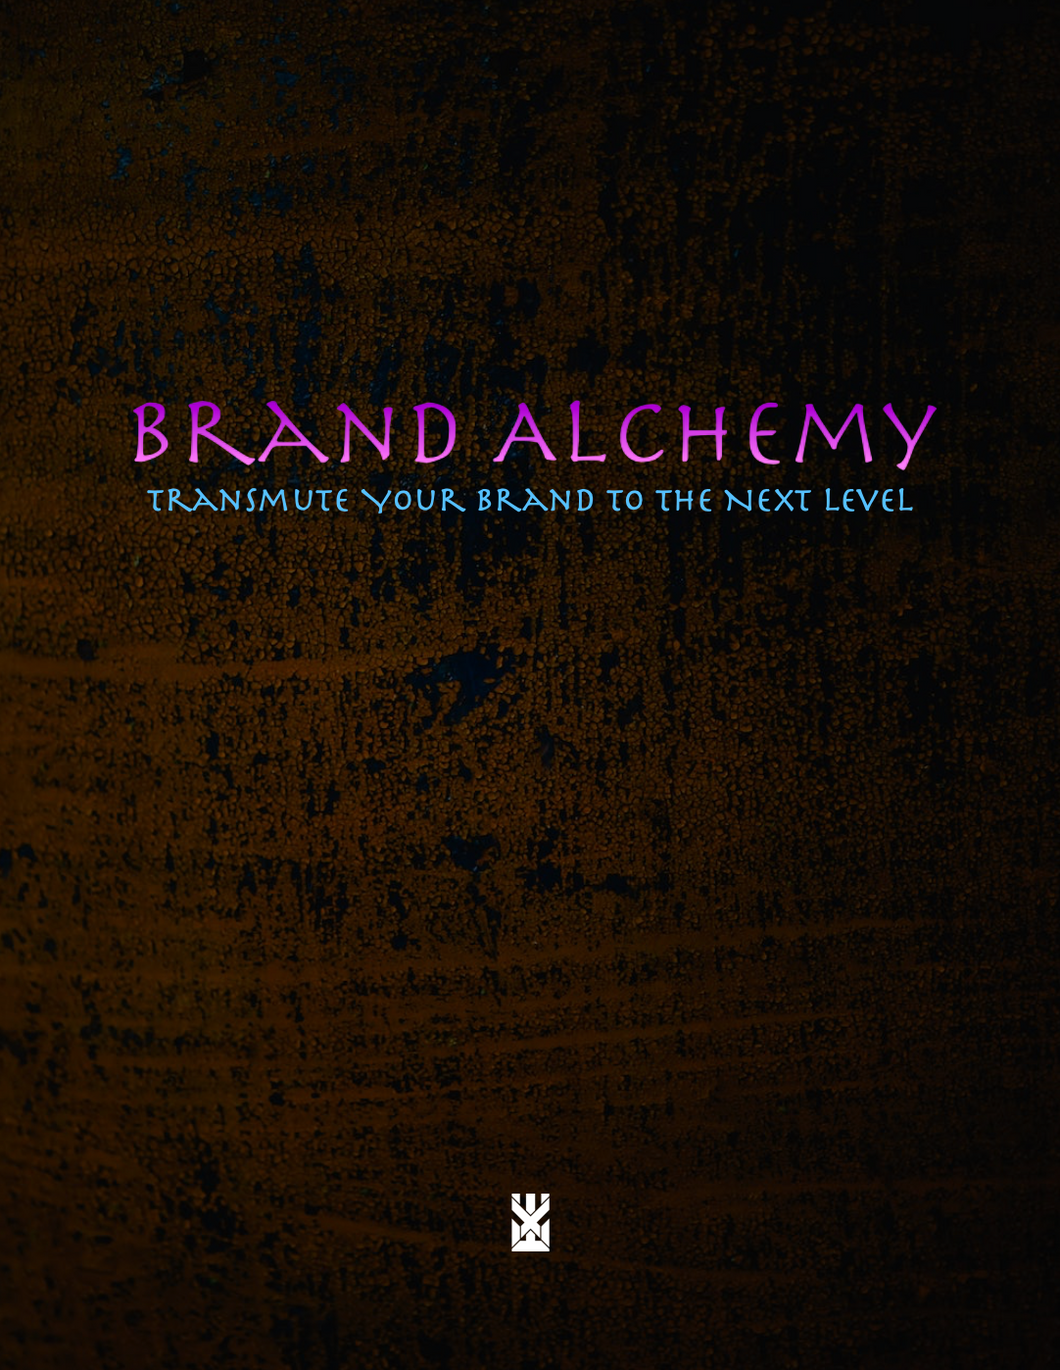 Brand Alchemy: Transmute Your Brand to the Next Level (e-book)